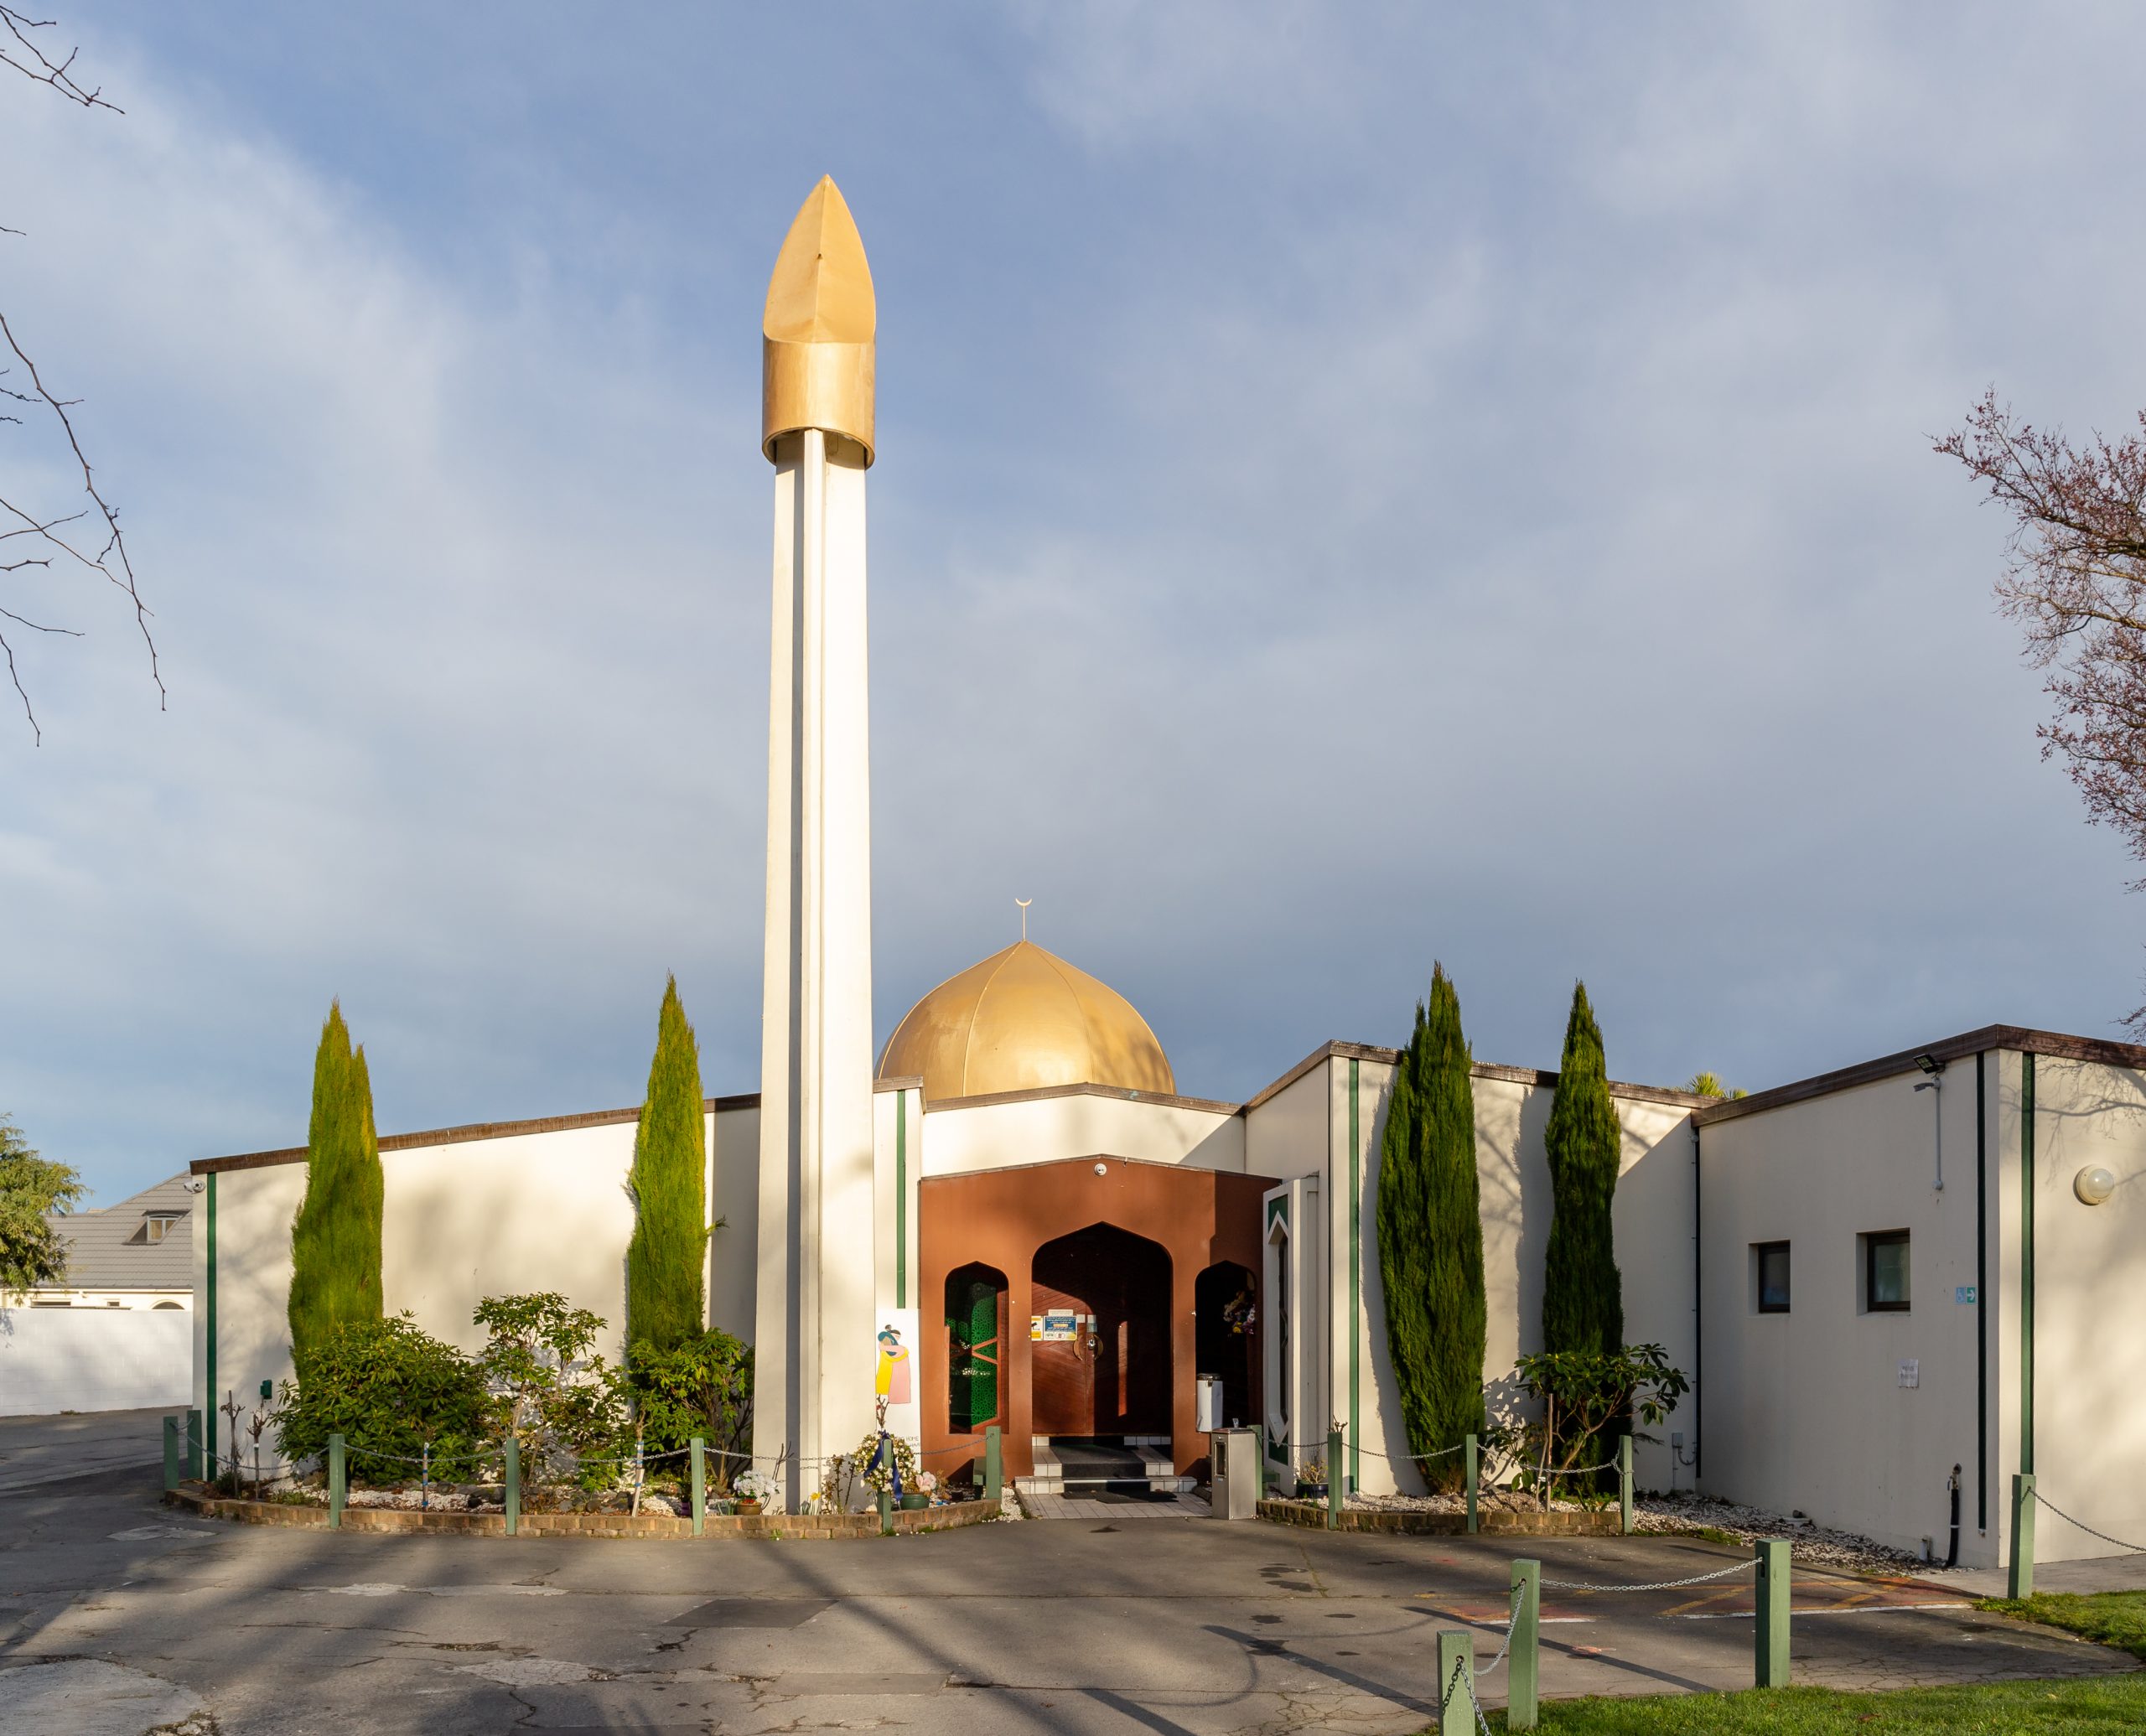 2019 Christchurch mosque shootings – There was no conclusive way to detect the attack ‘except by chance’, inquiry report says